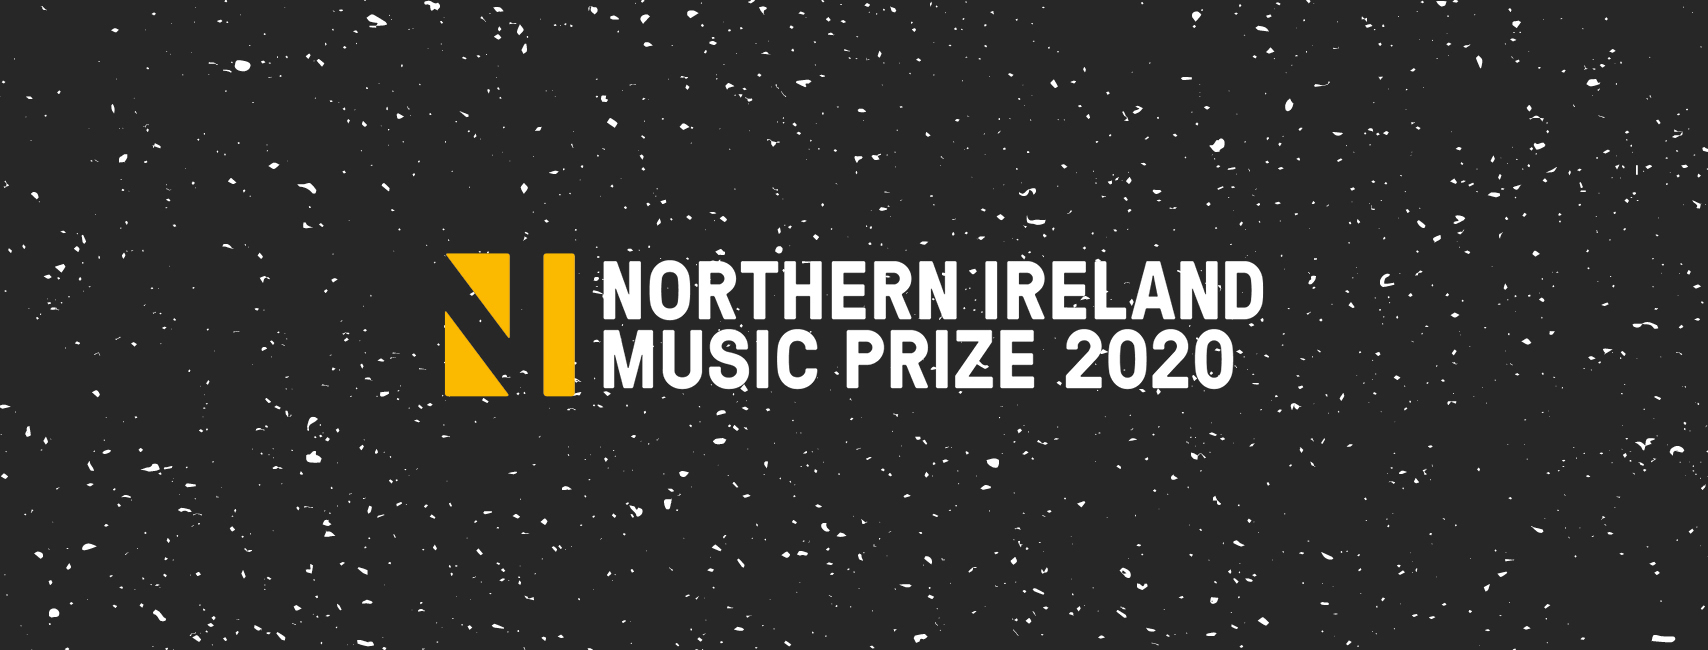 NI MUSIC PRIZE 2020 Confirmed for Thursday November 12th @ 8pm as part of Sound of Belfast 2020 1